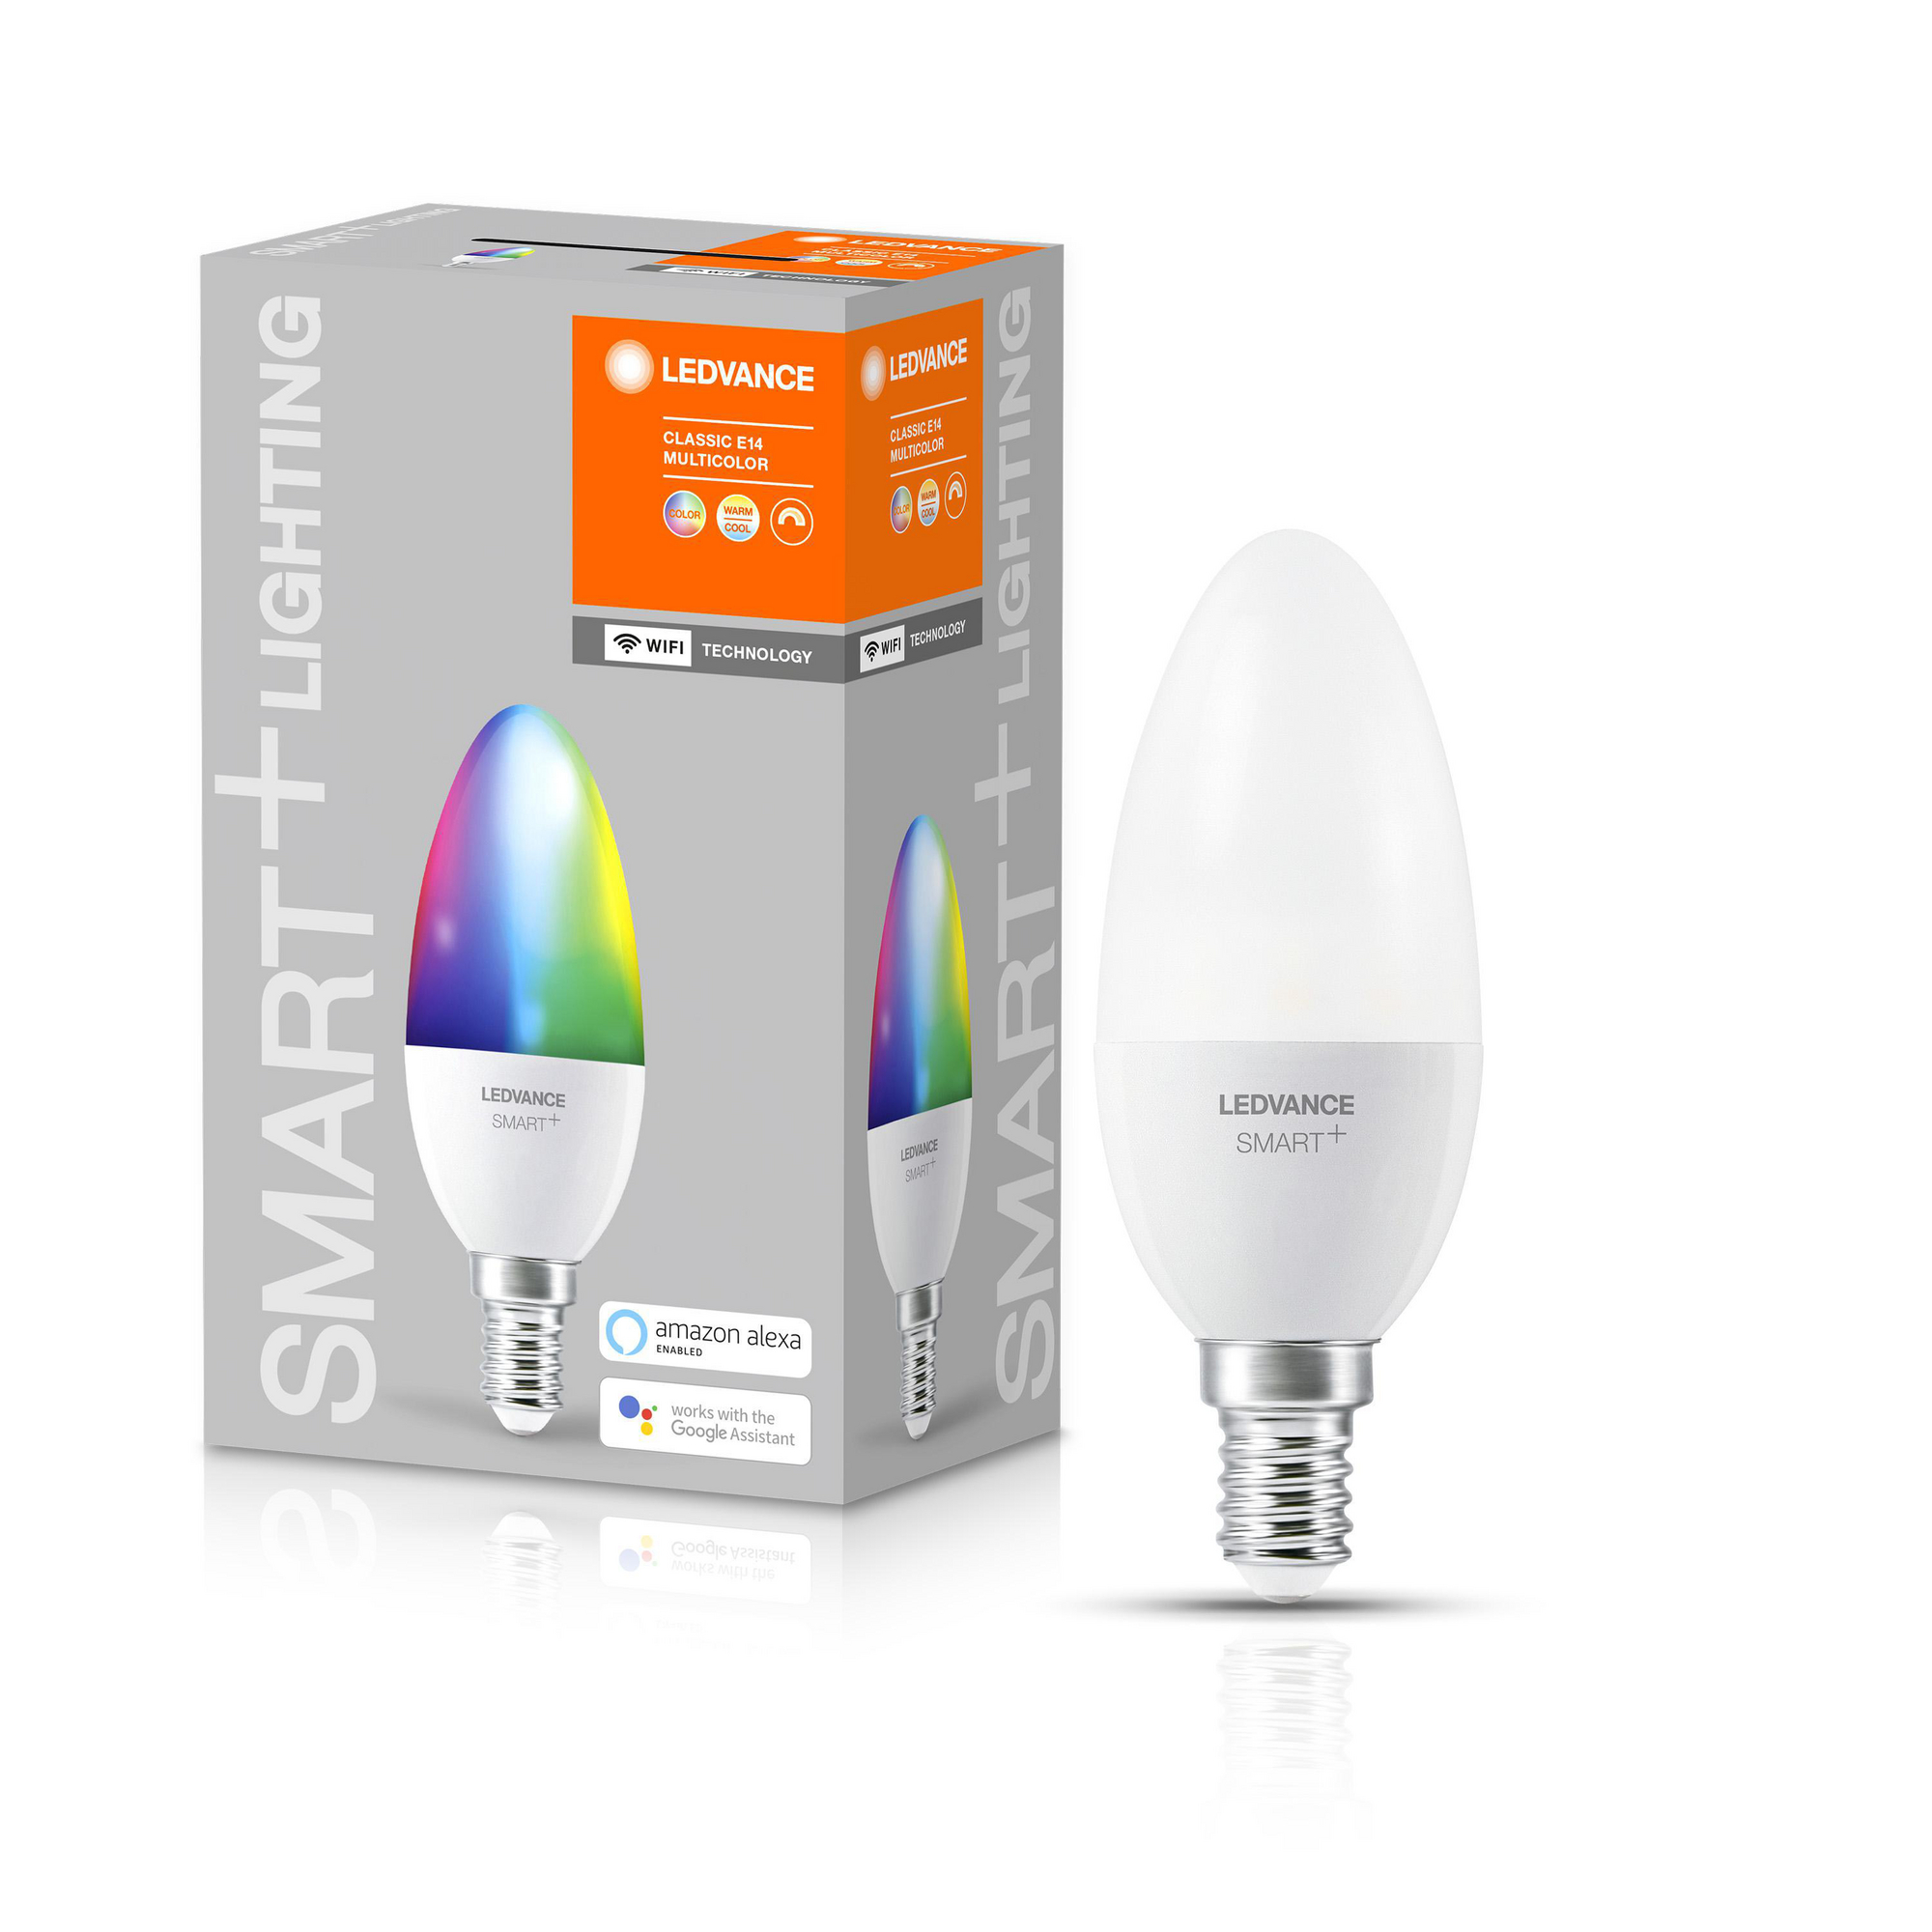 LED-Lampe 'Smart+' 10,7 cm 470 lm 5 W E14 weiß WLAN Tunable White + product picture